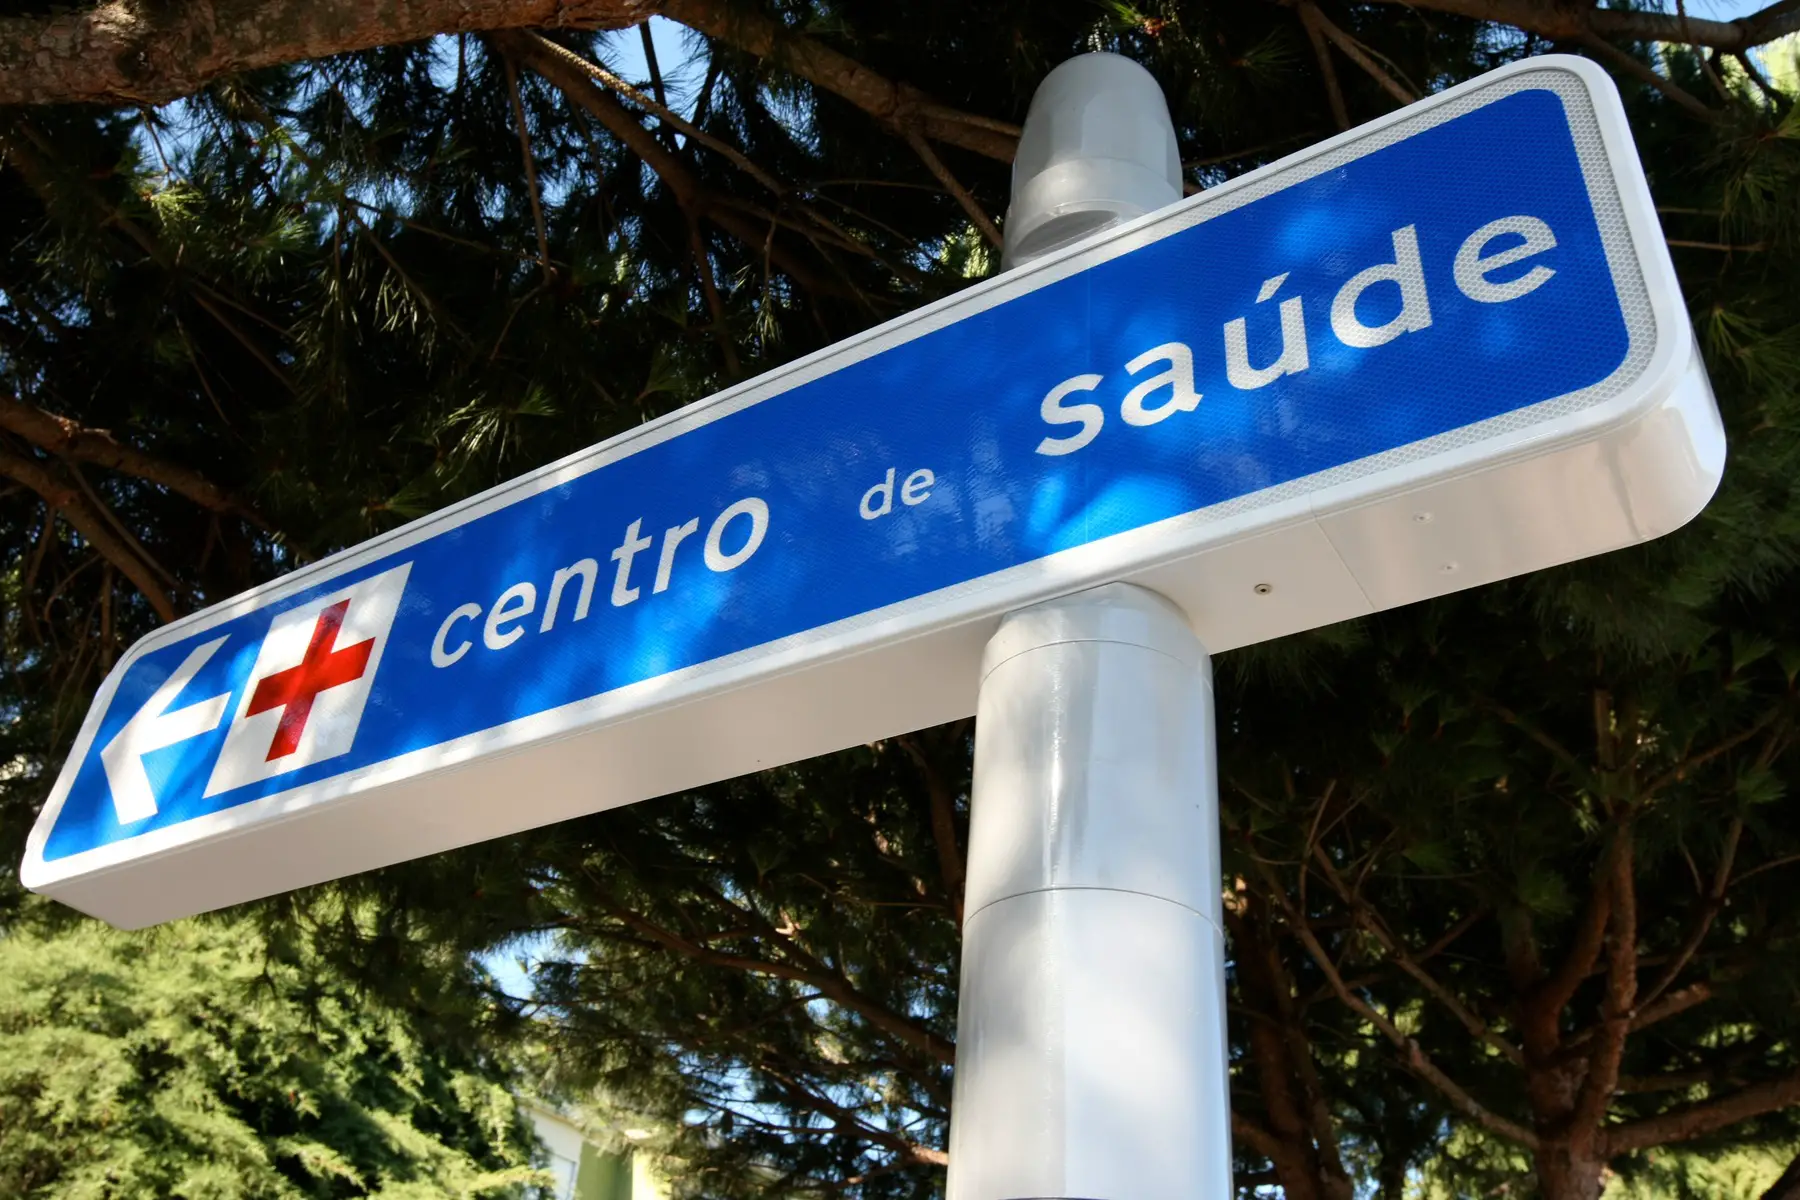 Street sign pointing to health center in Portugal